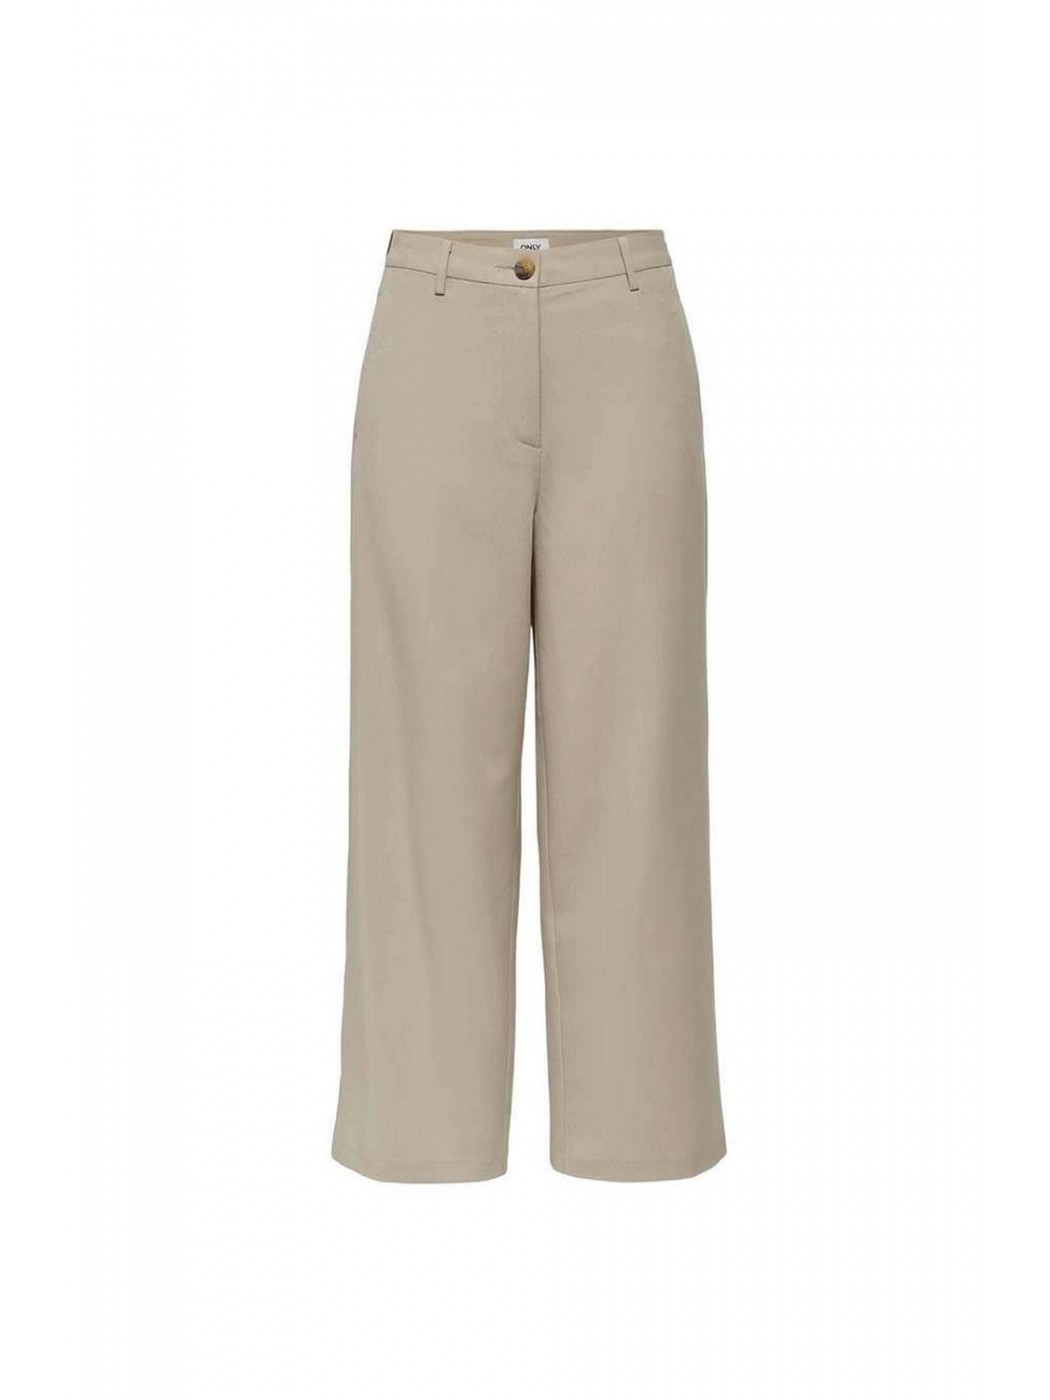 PANTALON ONLY MUJER BEIGE...